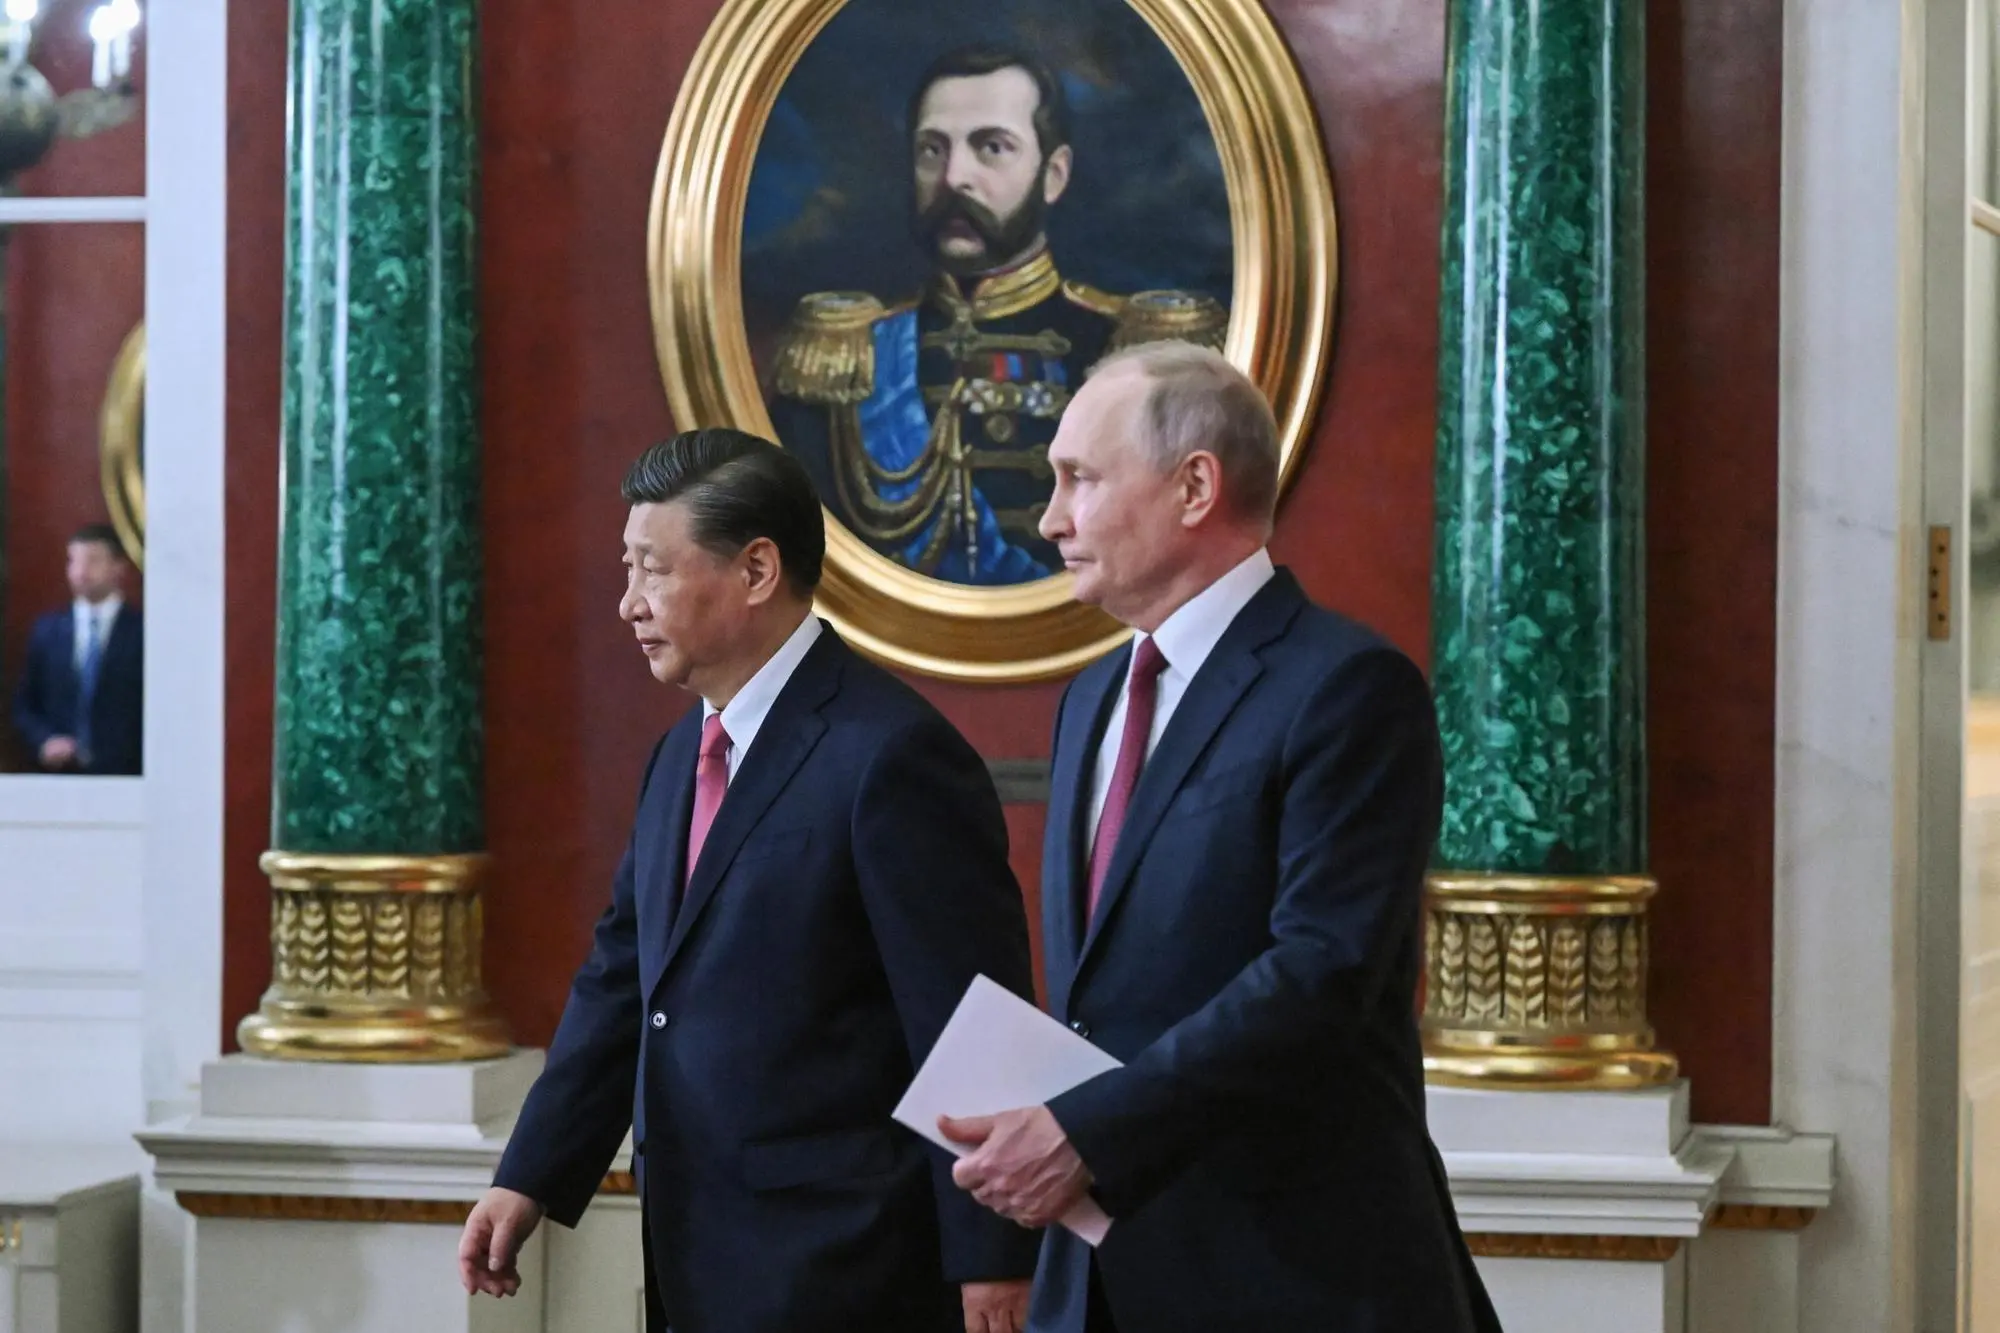 Chinese President Xi Jinping (L) and Russian President Vladimir Putin (R) enter a hall for the documents signing ceremony after their Russia - China talks at the Kremlin in Moscow, Russia, 21 March 2023. Chinese President Xi Jinping arrived in Moscow on a three-day visit, which will last from March 20 to 22, according to Russian and Chinese state agencies. Xi Jinping visits Russia on improving joint partnership and developing key areas of Russian-Chinese economic cooperation. ANSA/GRIGORY SYSOEVS / SPUTNIK / KREMLIN POOL MANDATORY CREDIT